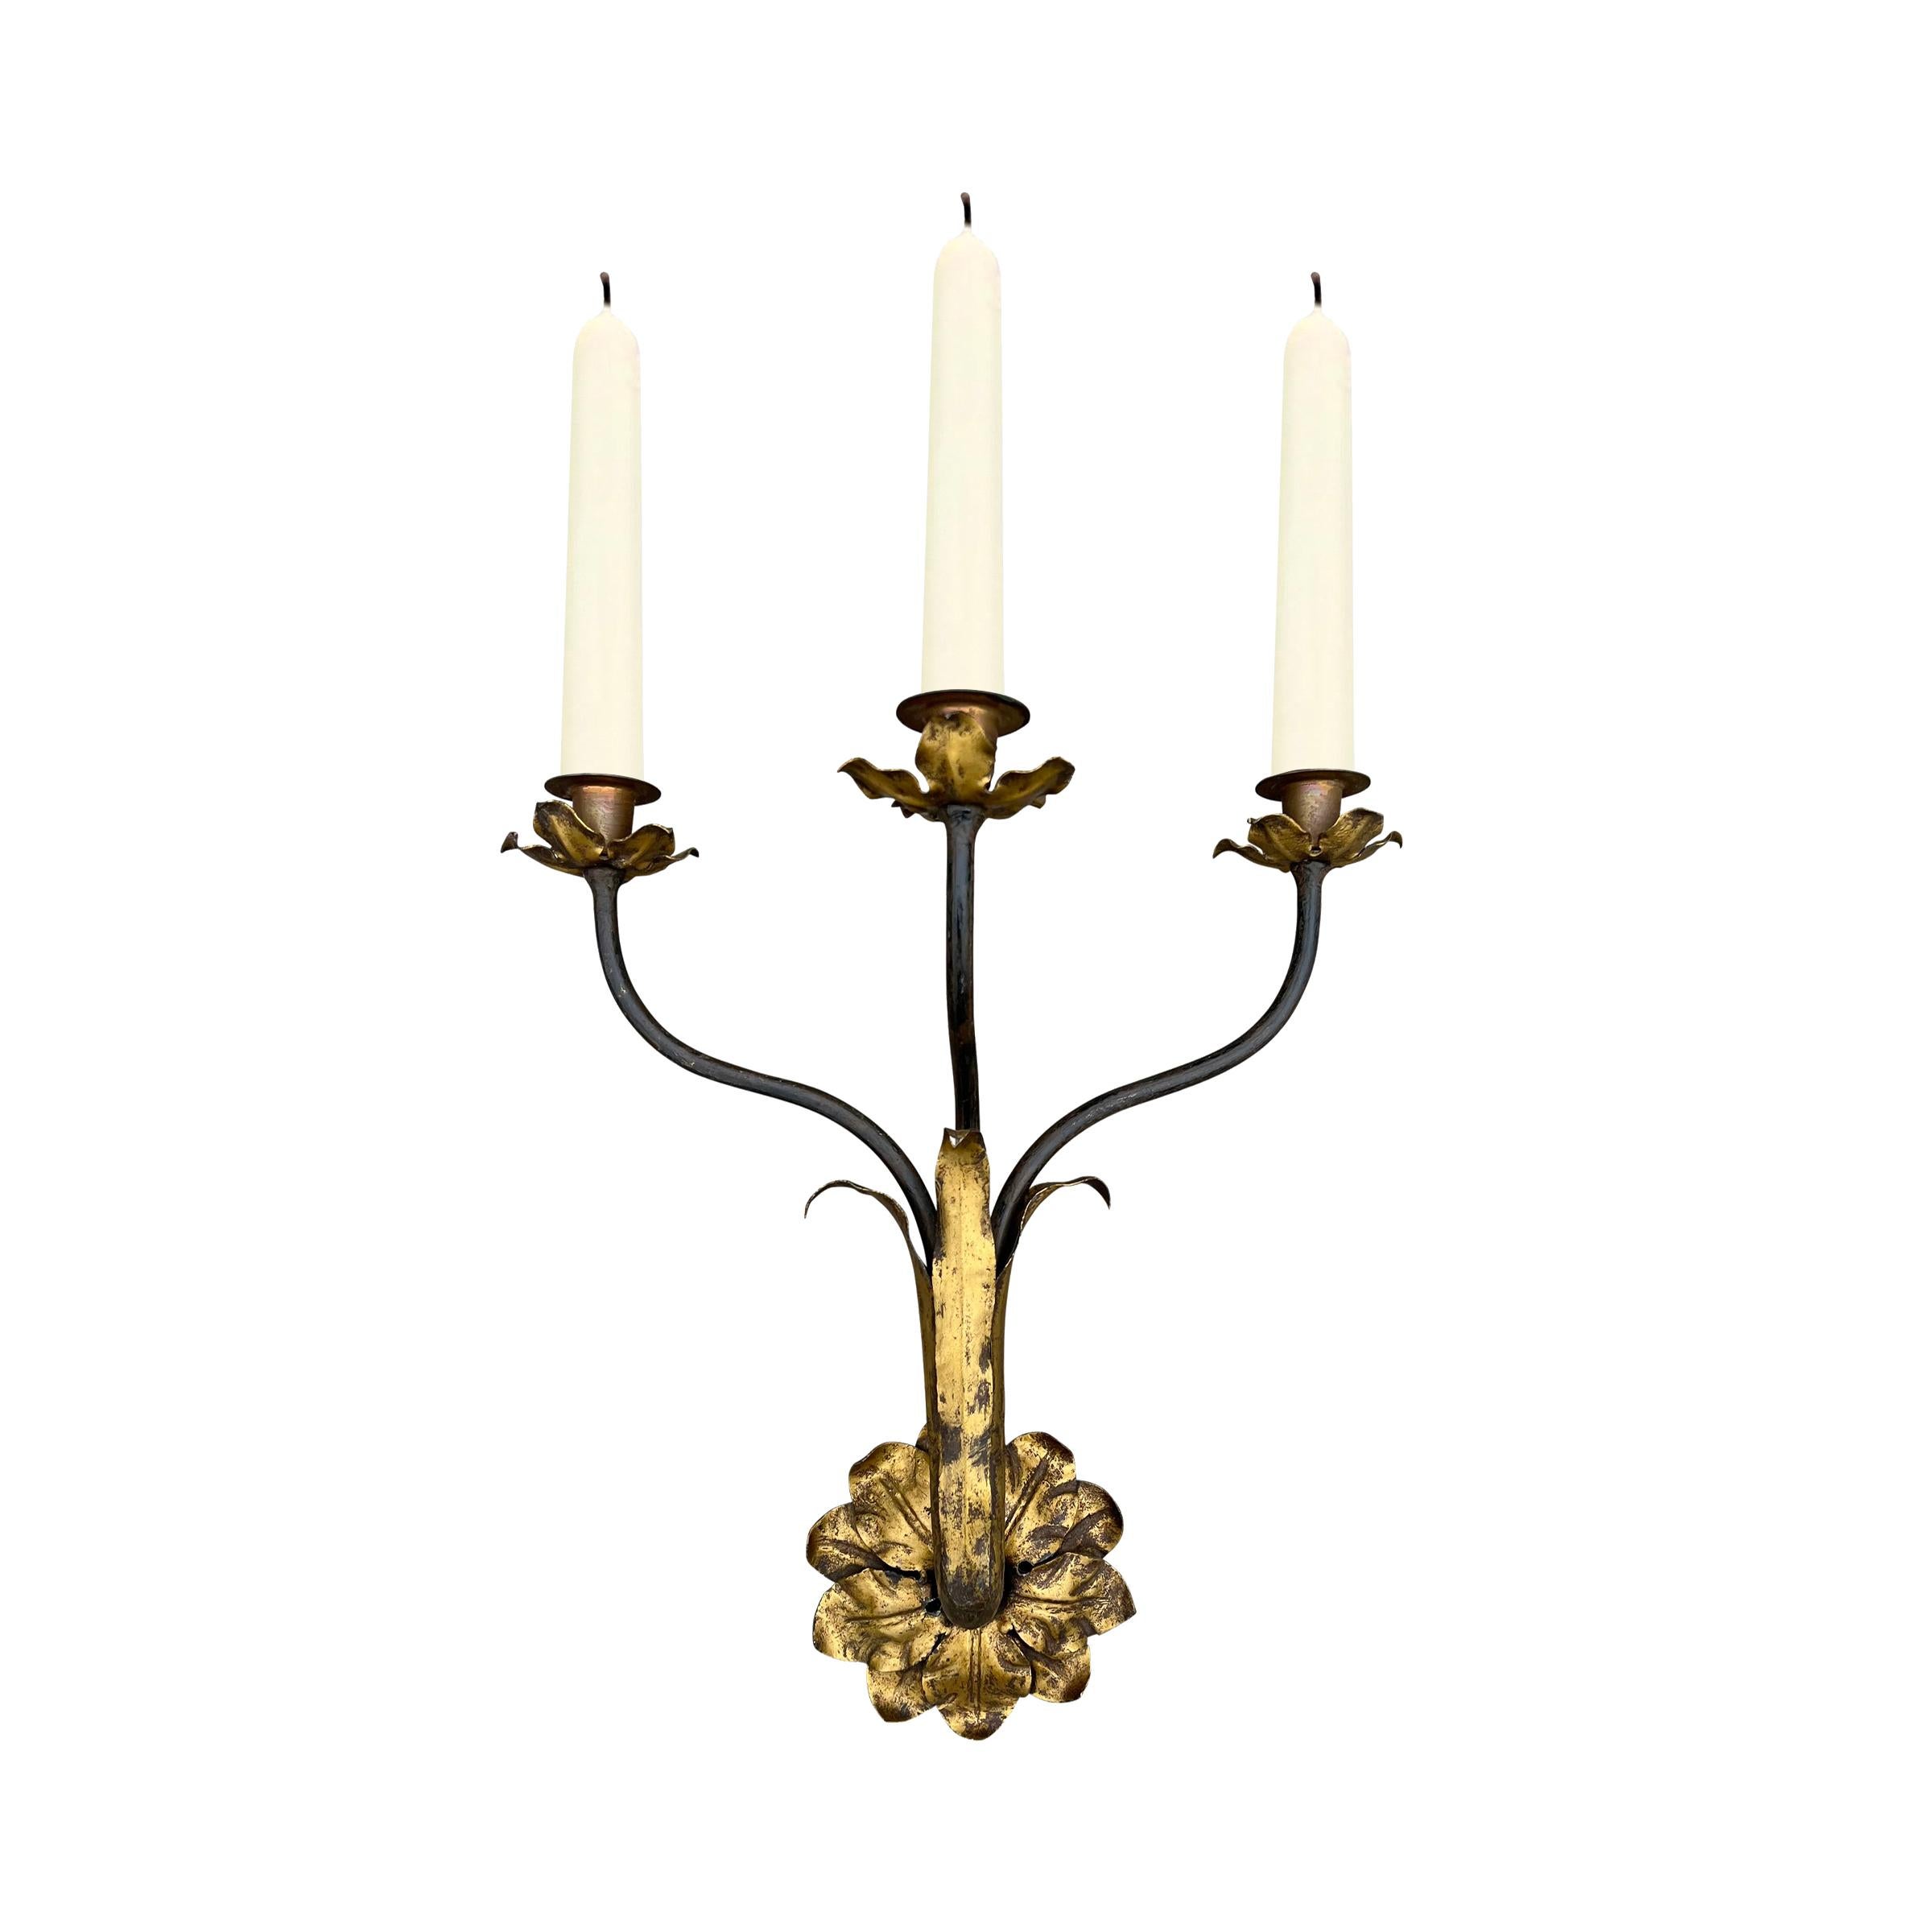 Set of Four Early 20th Century Italian Gilt Iron Candle Sconces For Sale 1